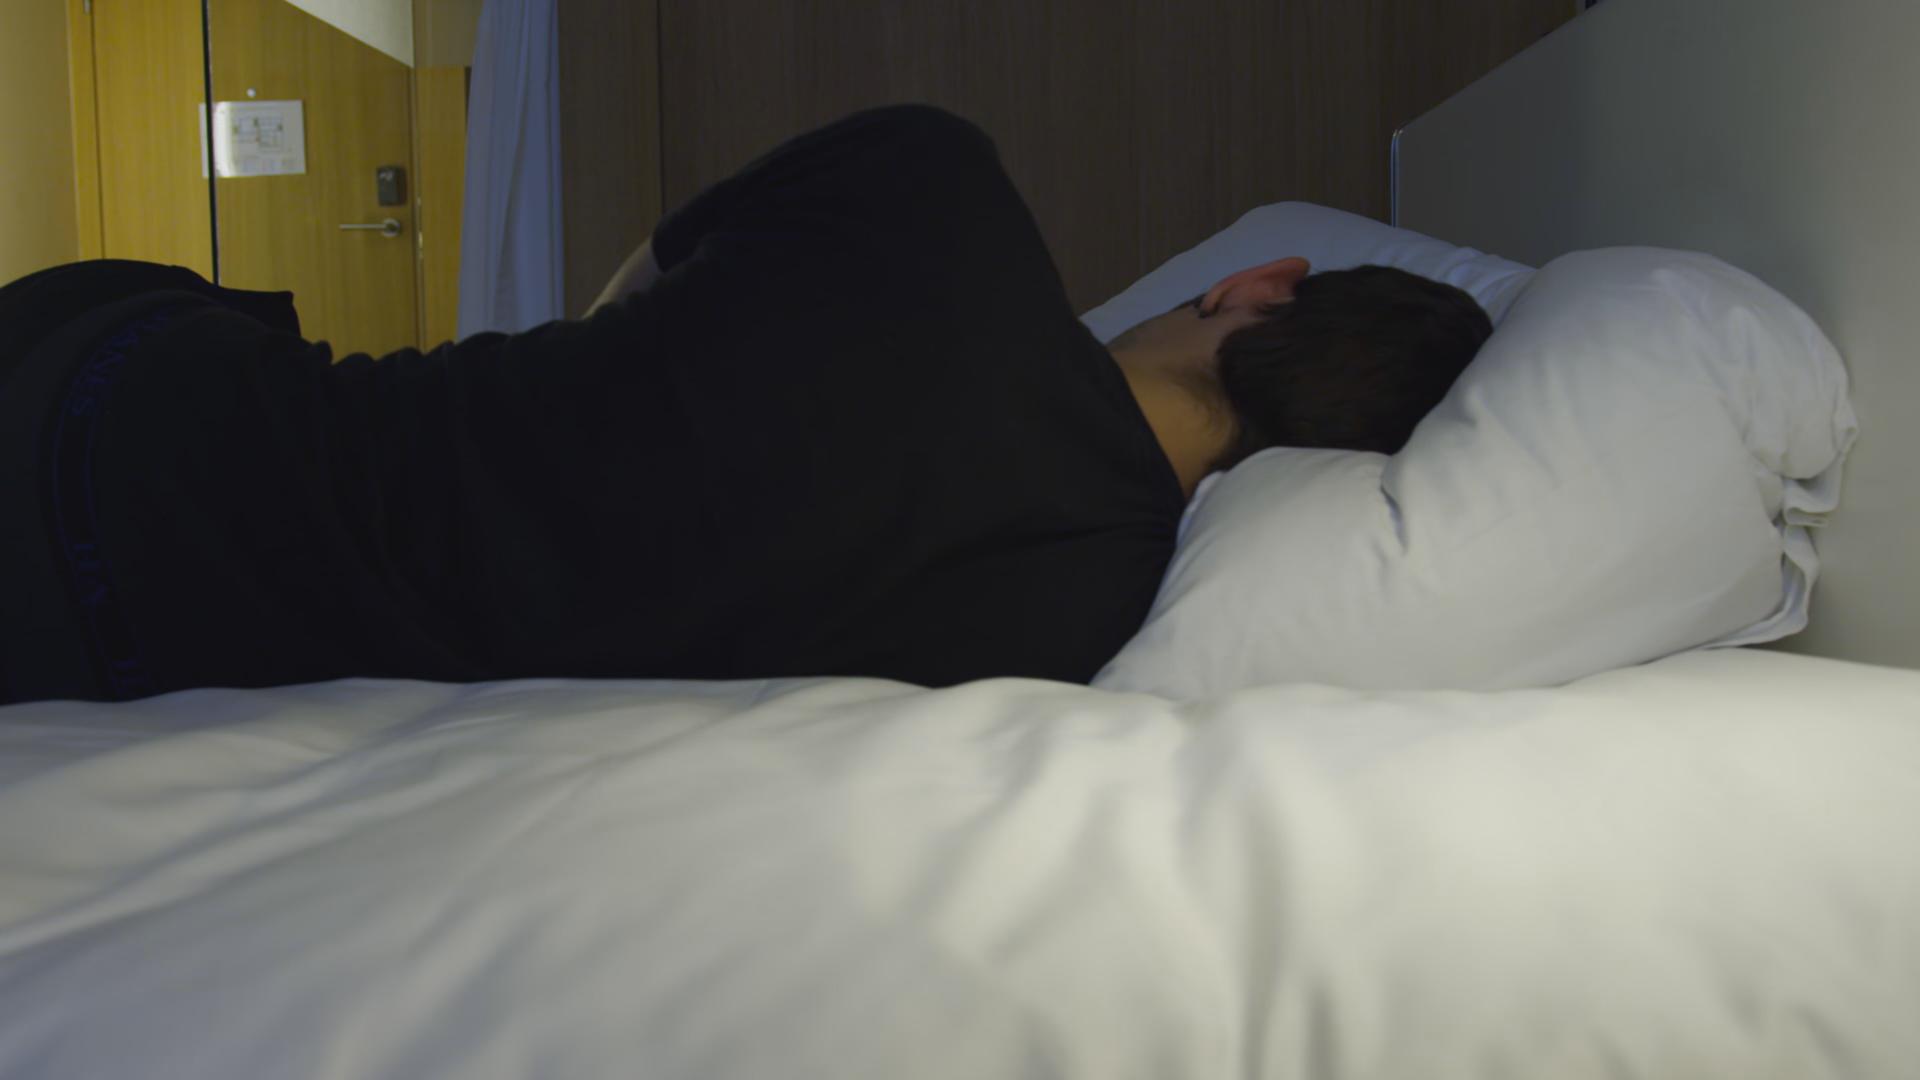 One Hour 4K Footage of a Guy Sleeping in a Hotel